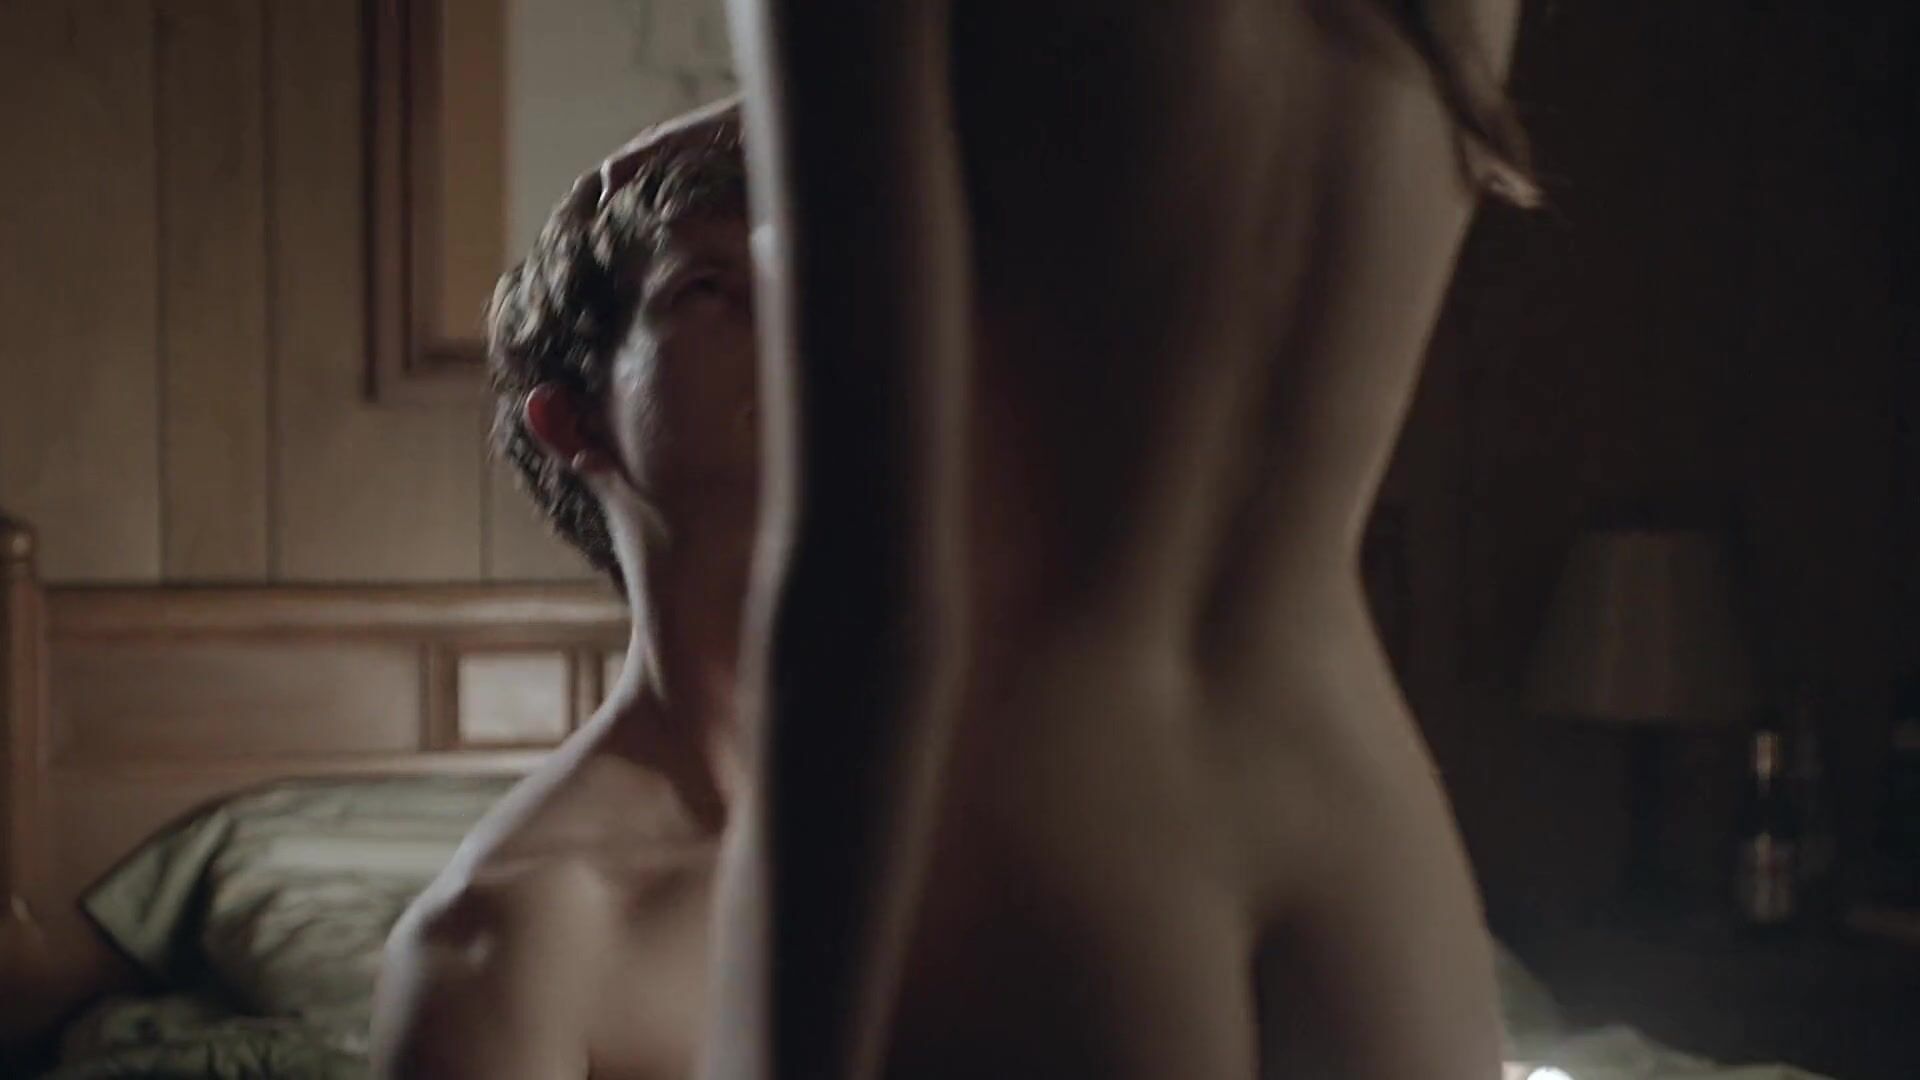 Suckingdick Naked beauty Lili Simmons gets penetrated by the shy man in TV series Banshee S2 Comendo - 1